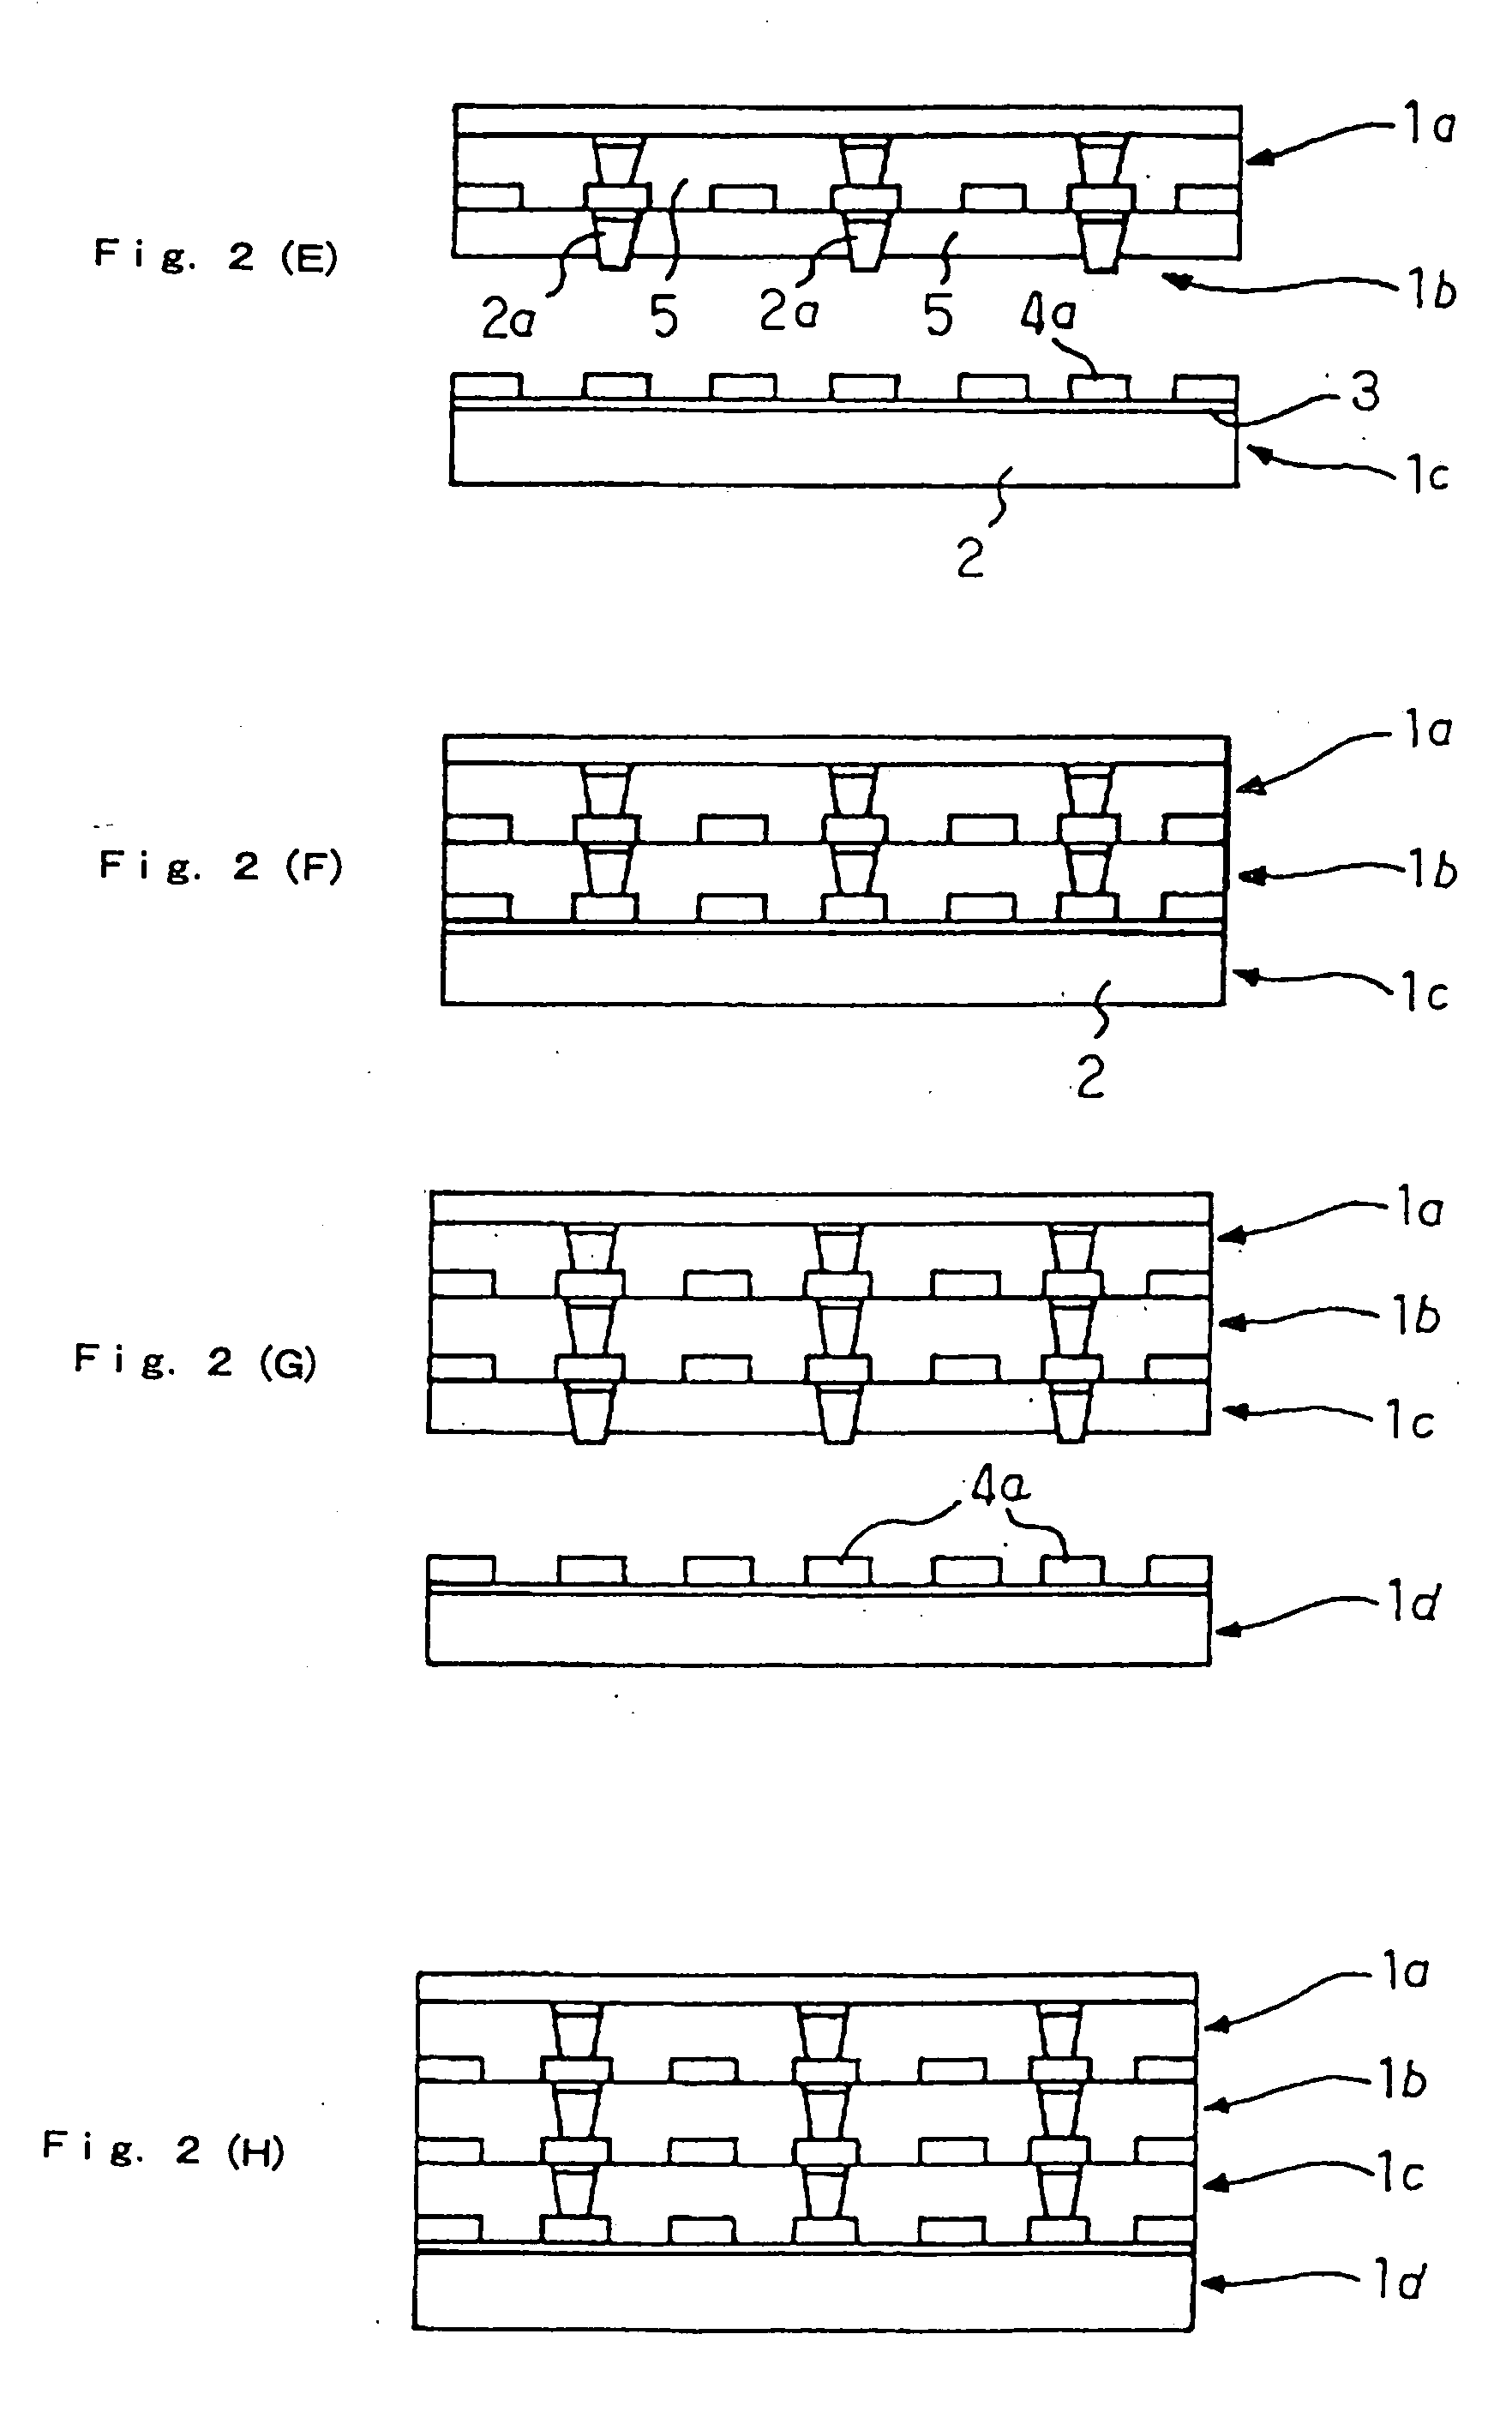 Multi-layer wiring board, method for producing multi-layer wiring board, polishing machine for multi-layer wiring board, and metal sheet for producing wiring board